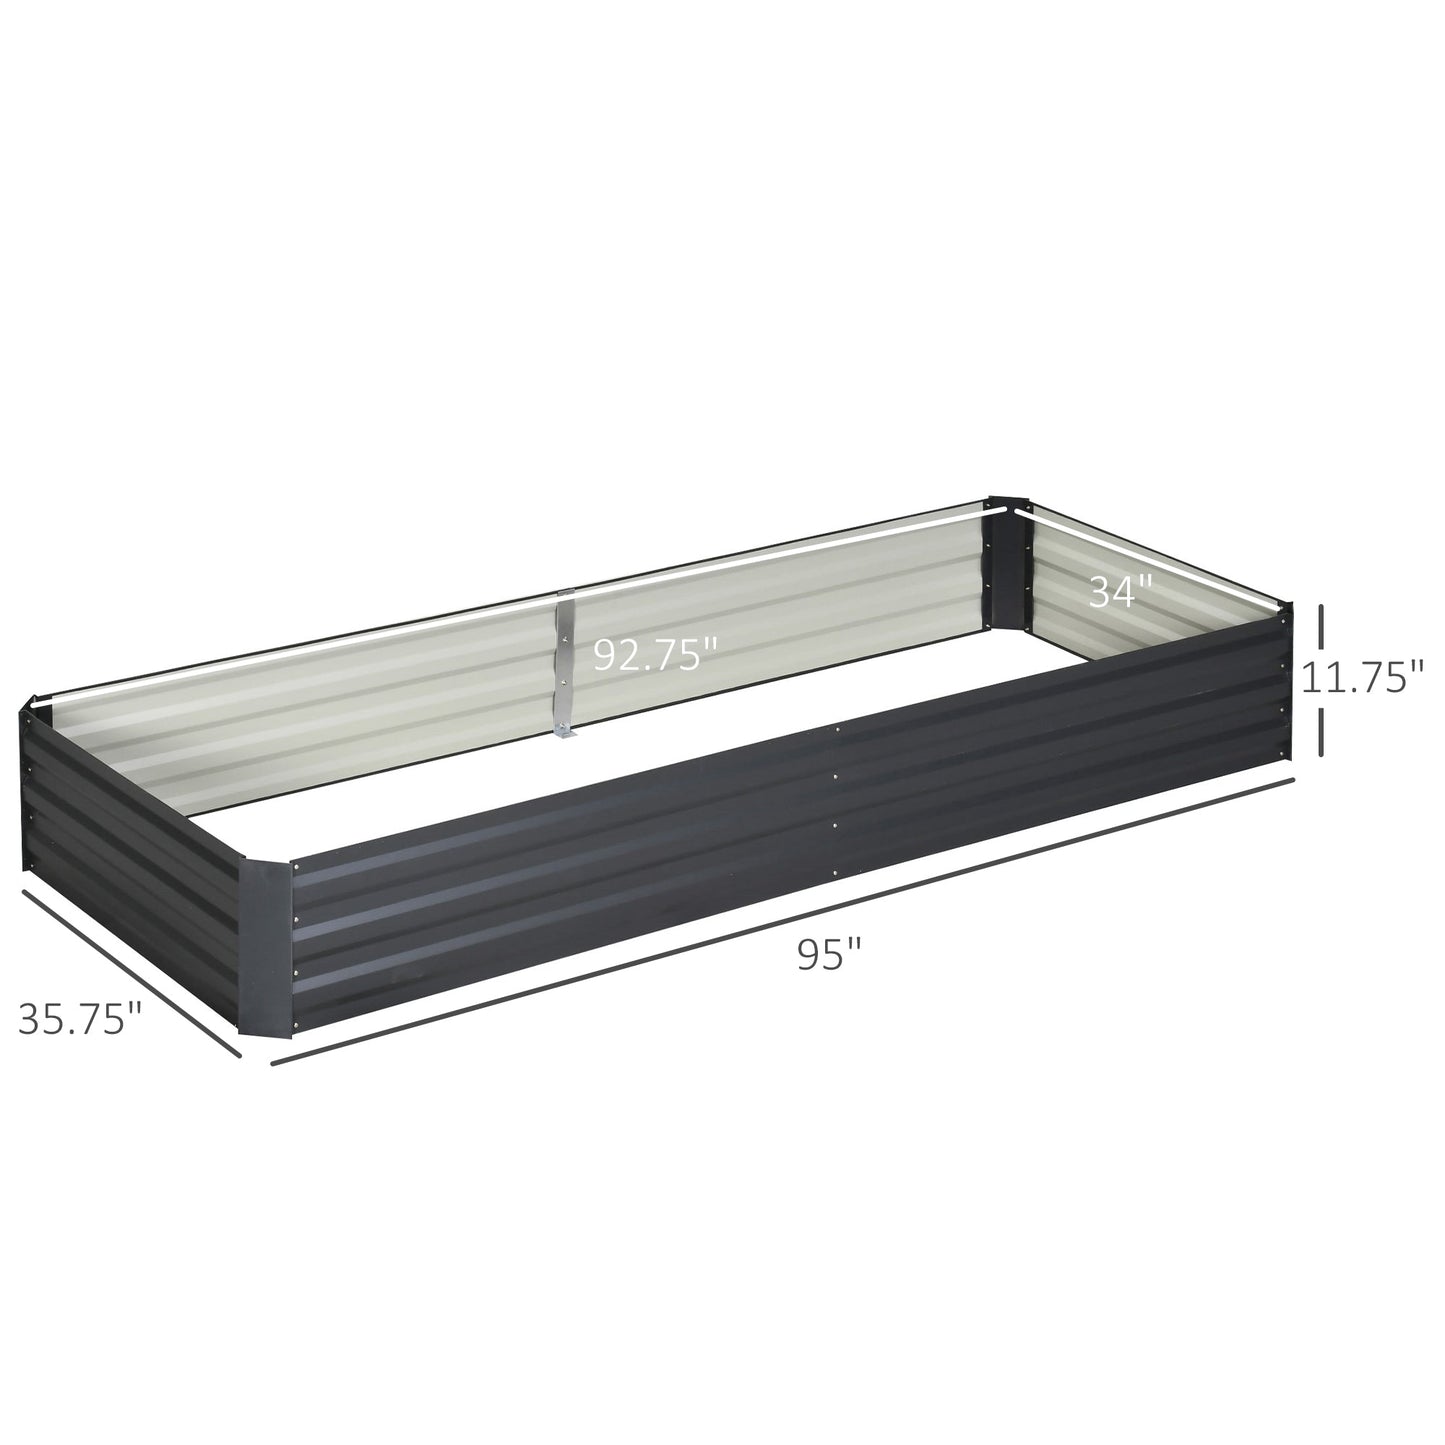 Outdoor and Garden-95" x 36" x 12" Galvanized Raised Garden Bed, Metal Elevated Planter Box, Easy DIY and Cleaning for Growing Flowers, Herbs, Succulents, Grey - Outdoor Style Company